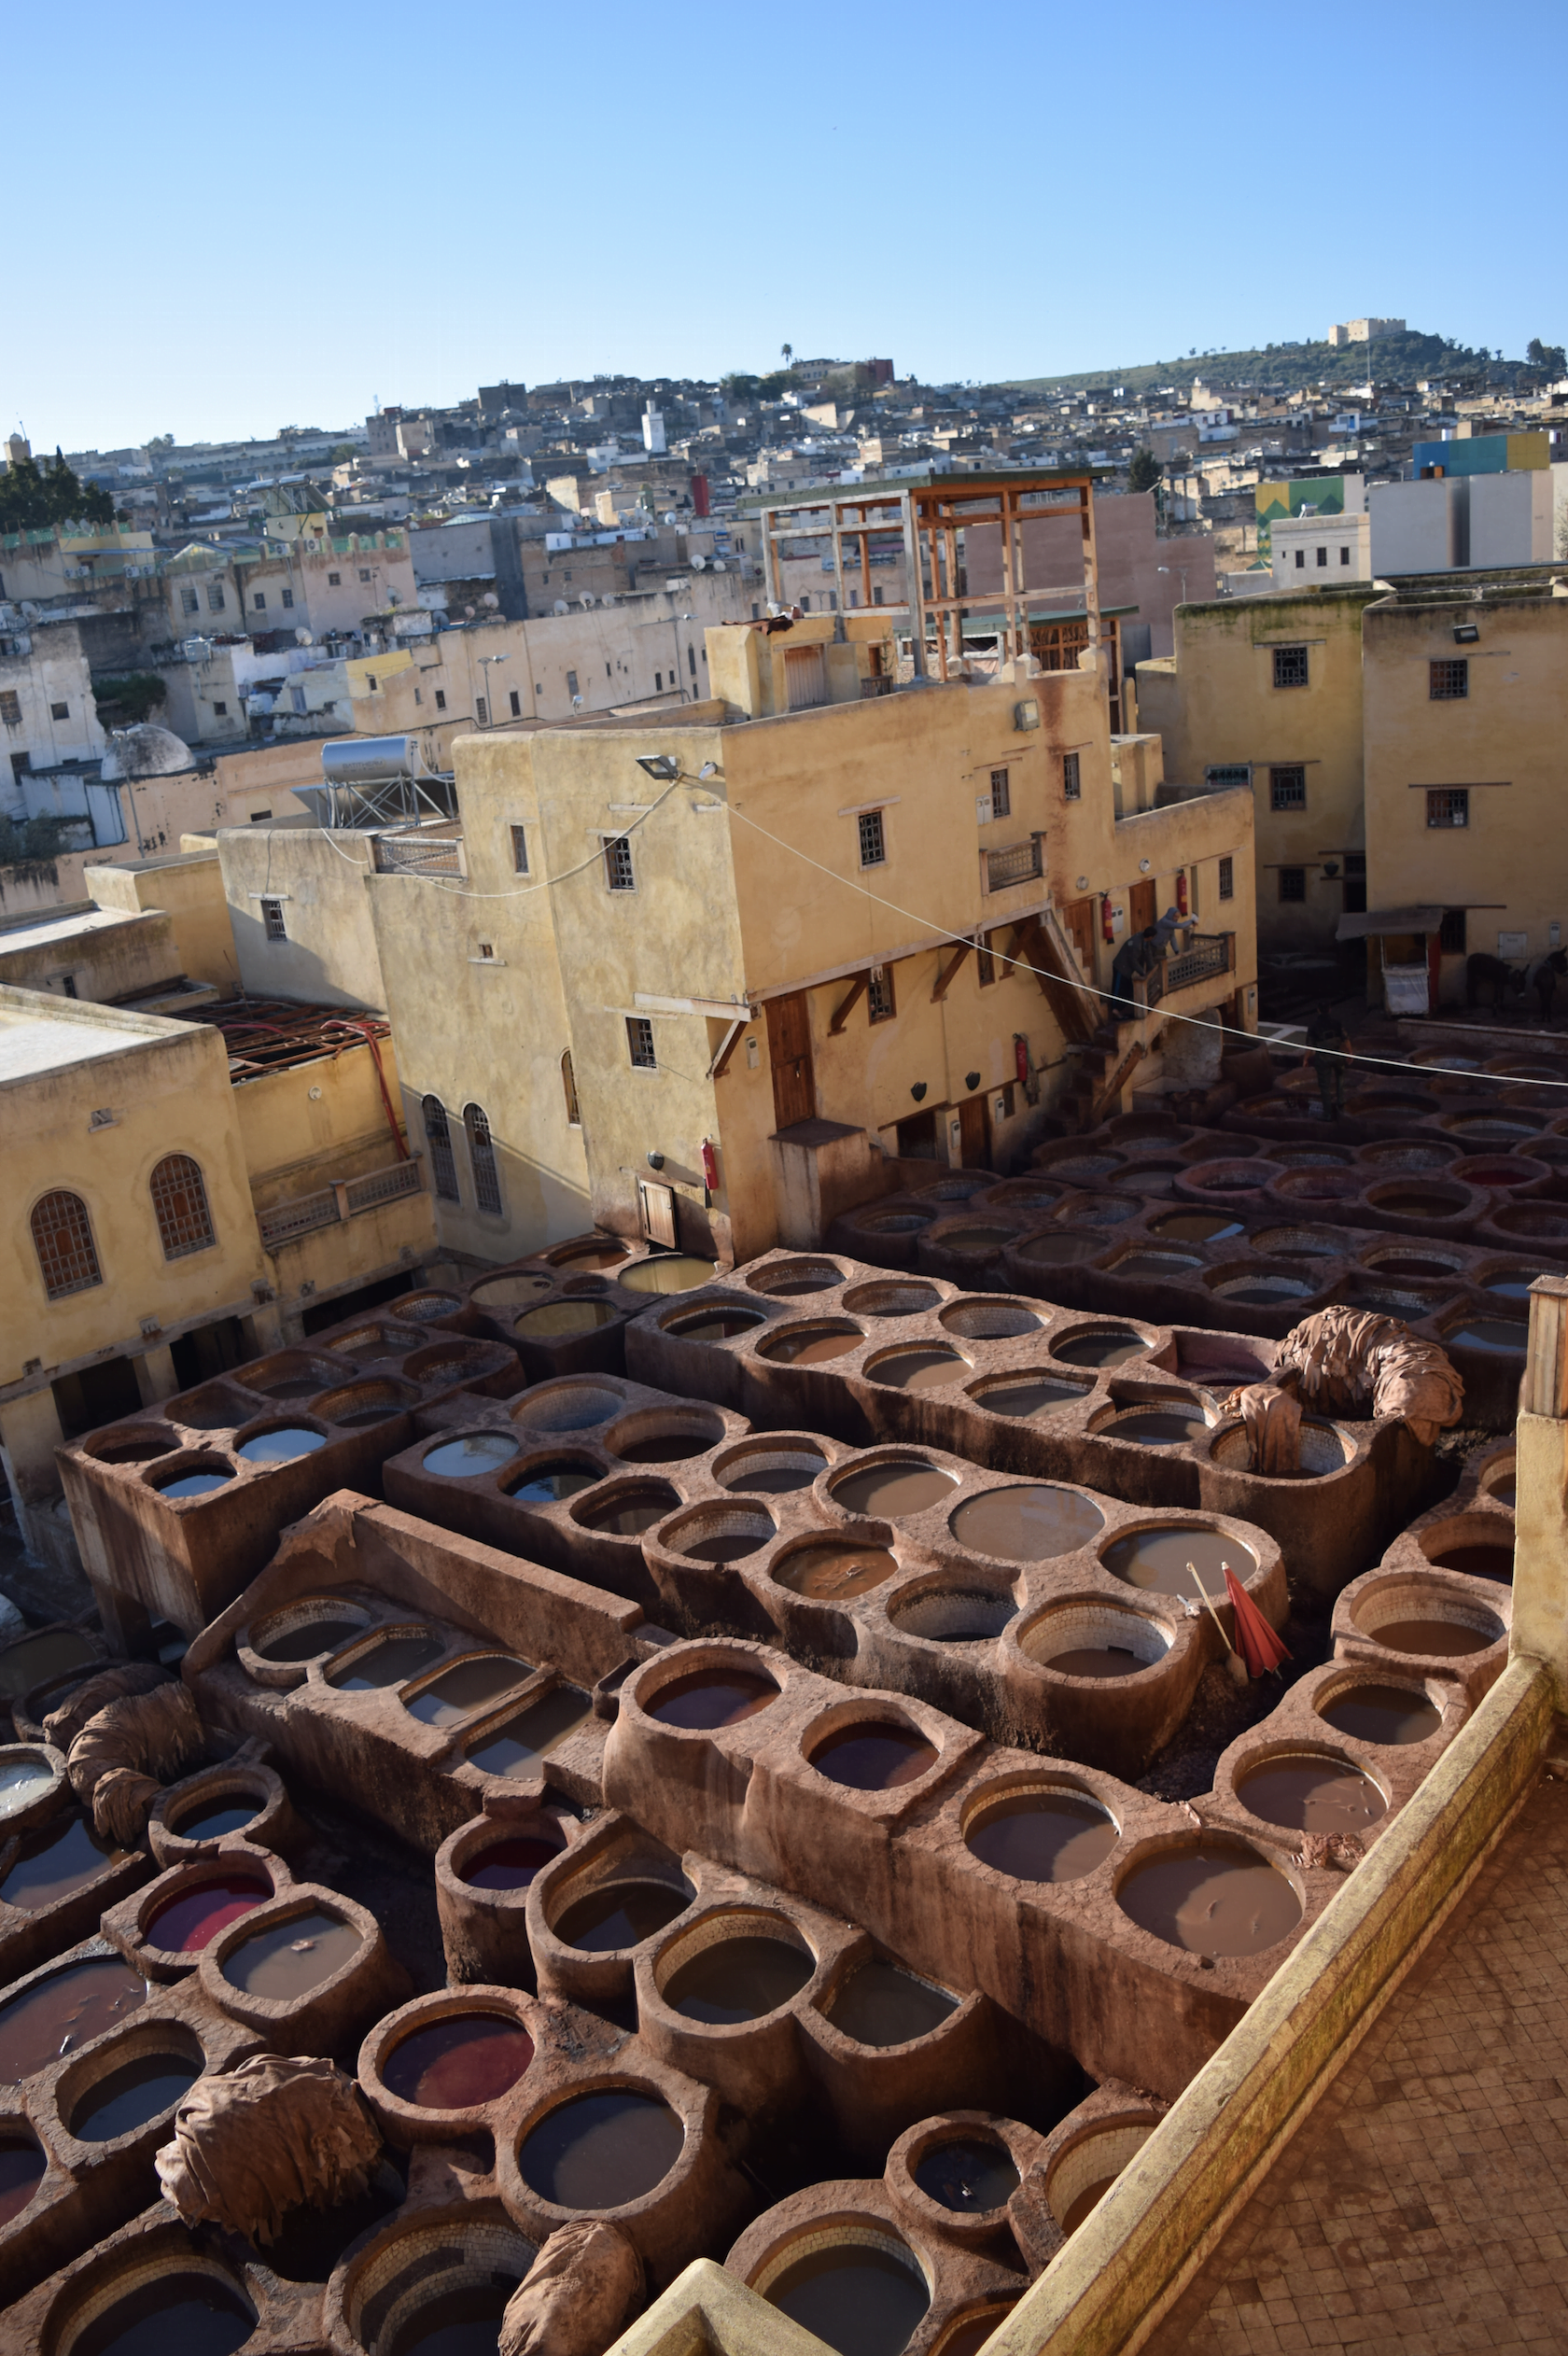 8 THINGS YOU CAN'T MISS IN FES, MOROCCO